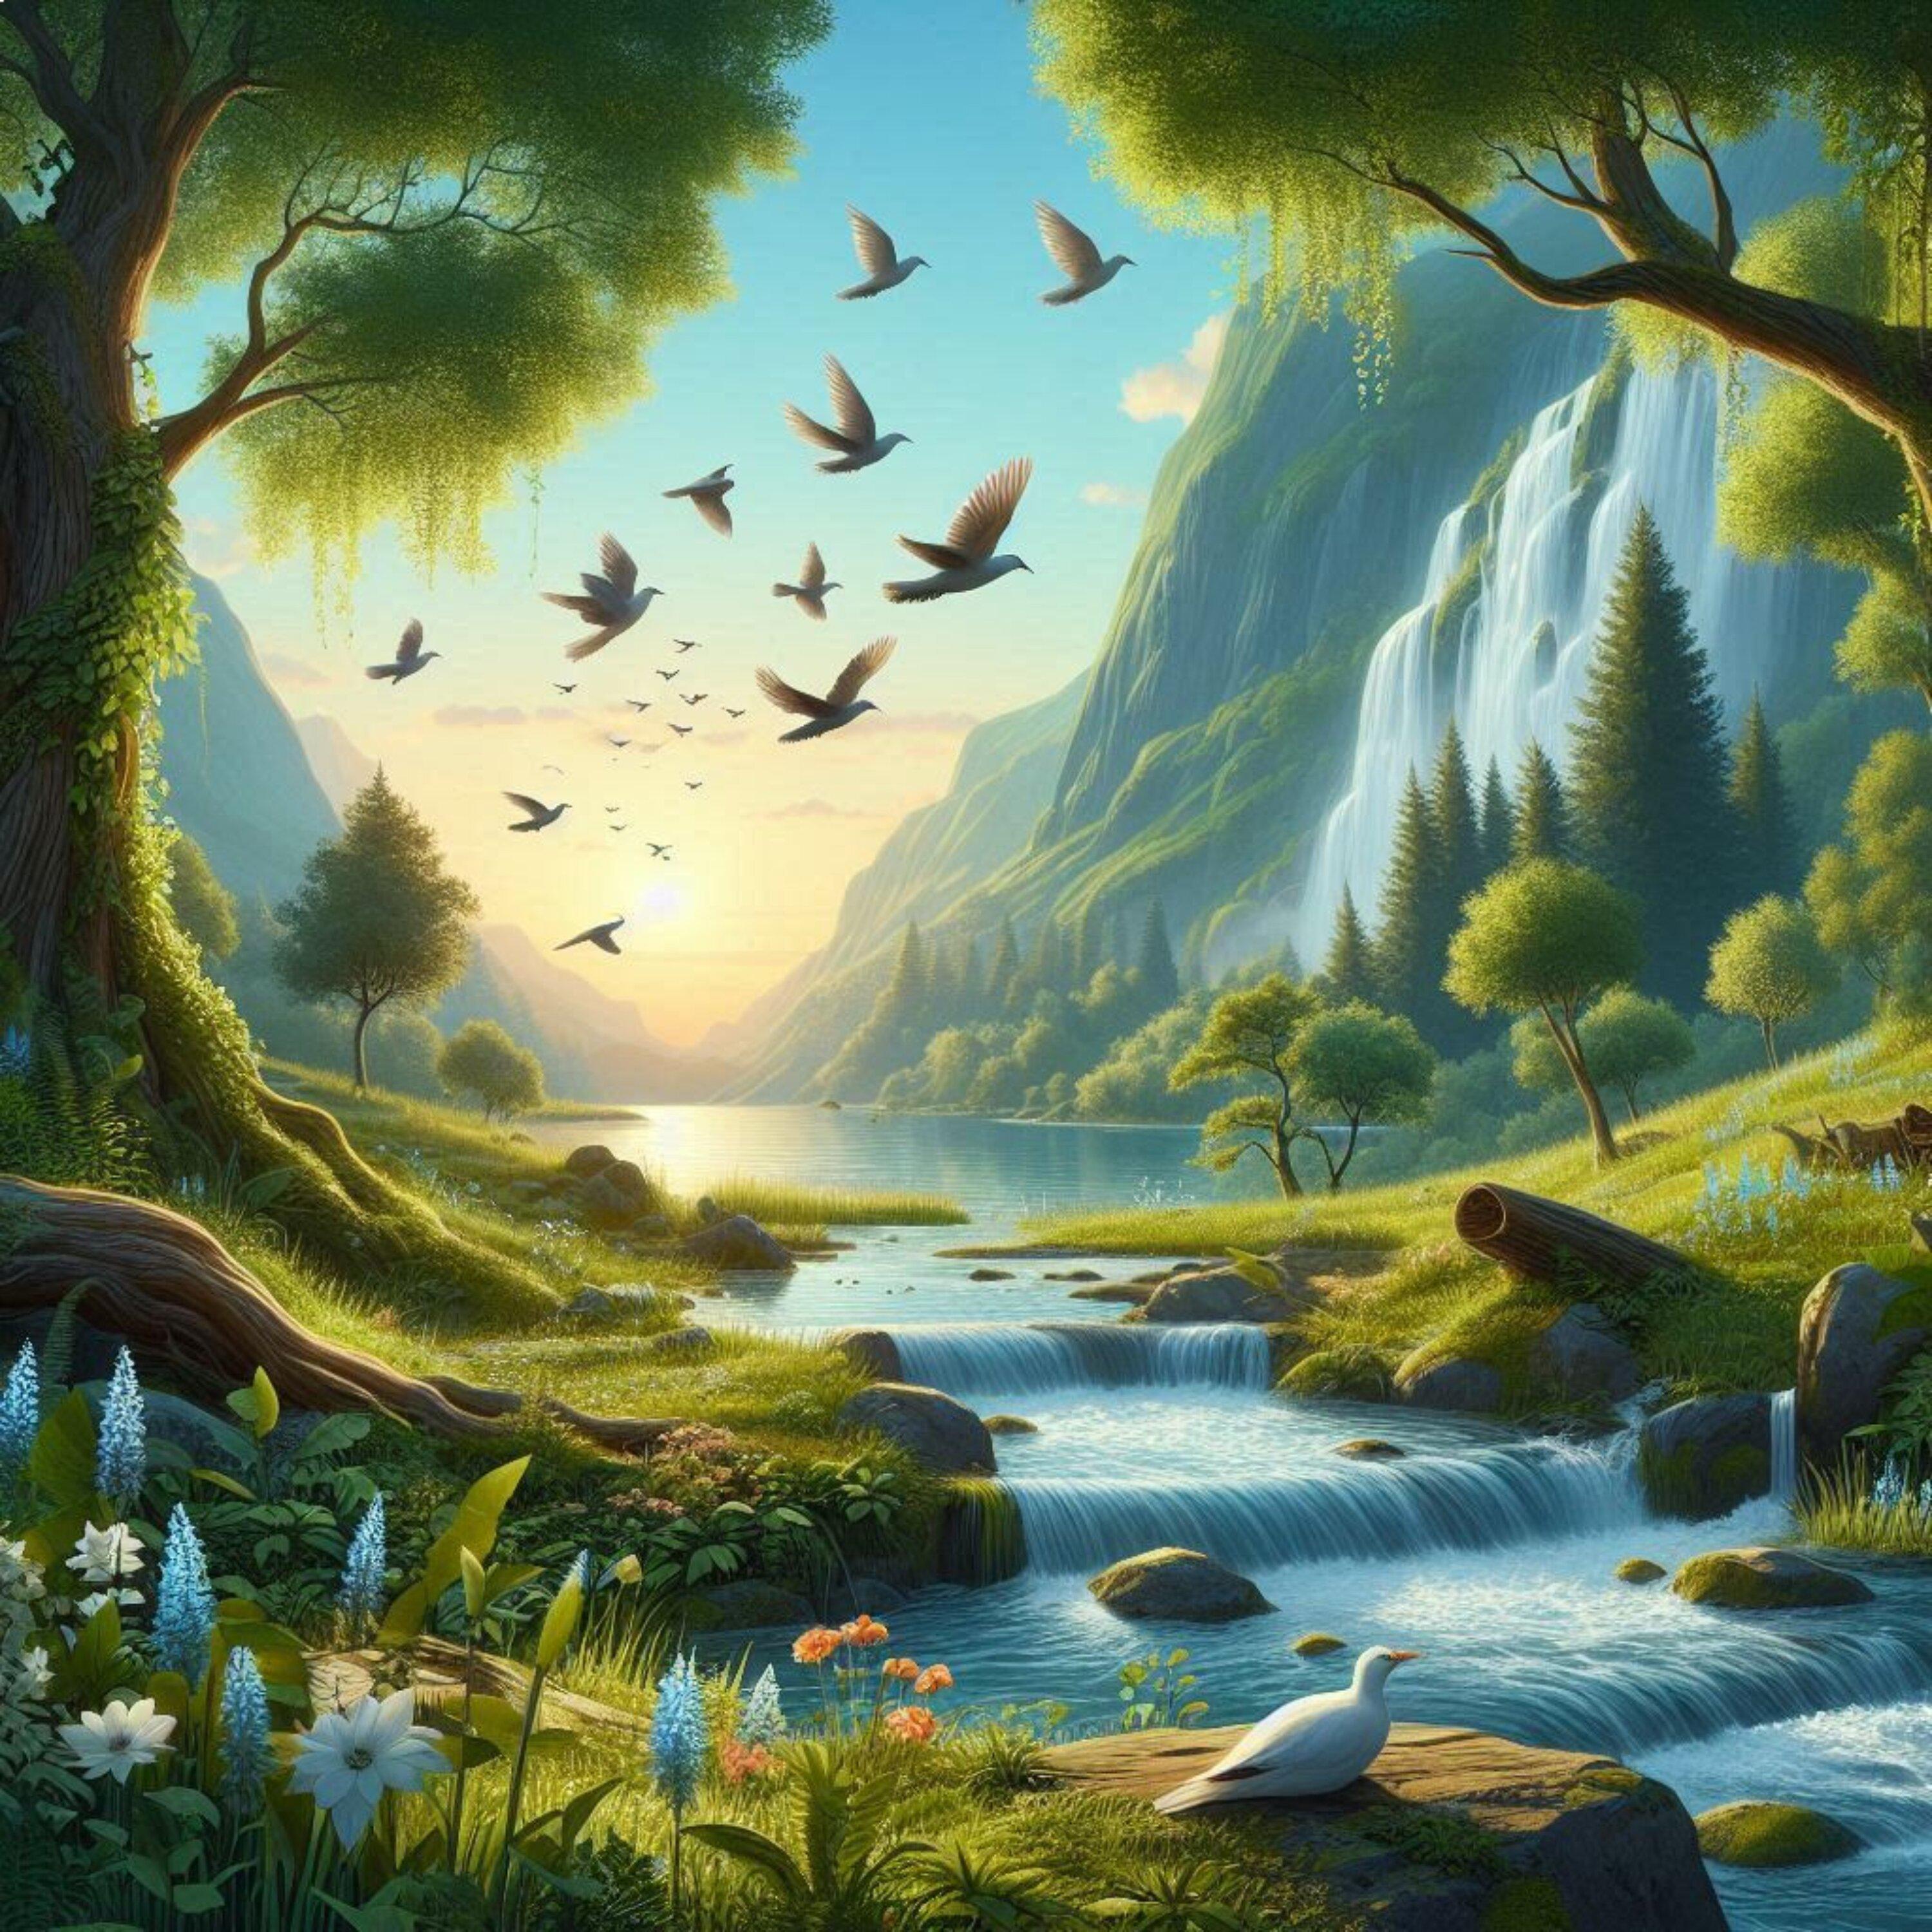 Zarek Atlas - Relaxing Landscape with Birds and Flowing Water in the Background 13